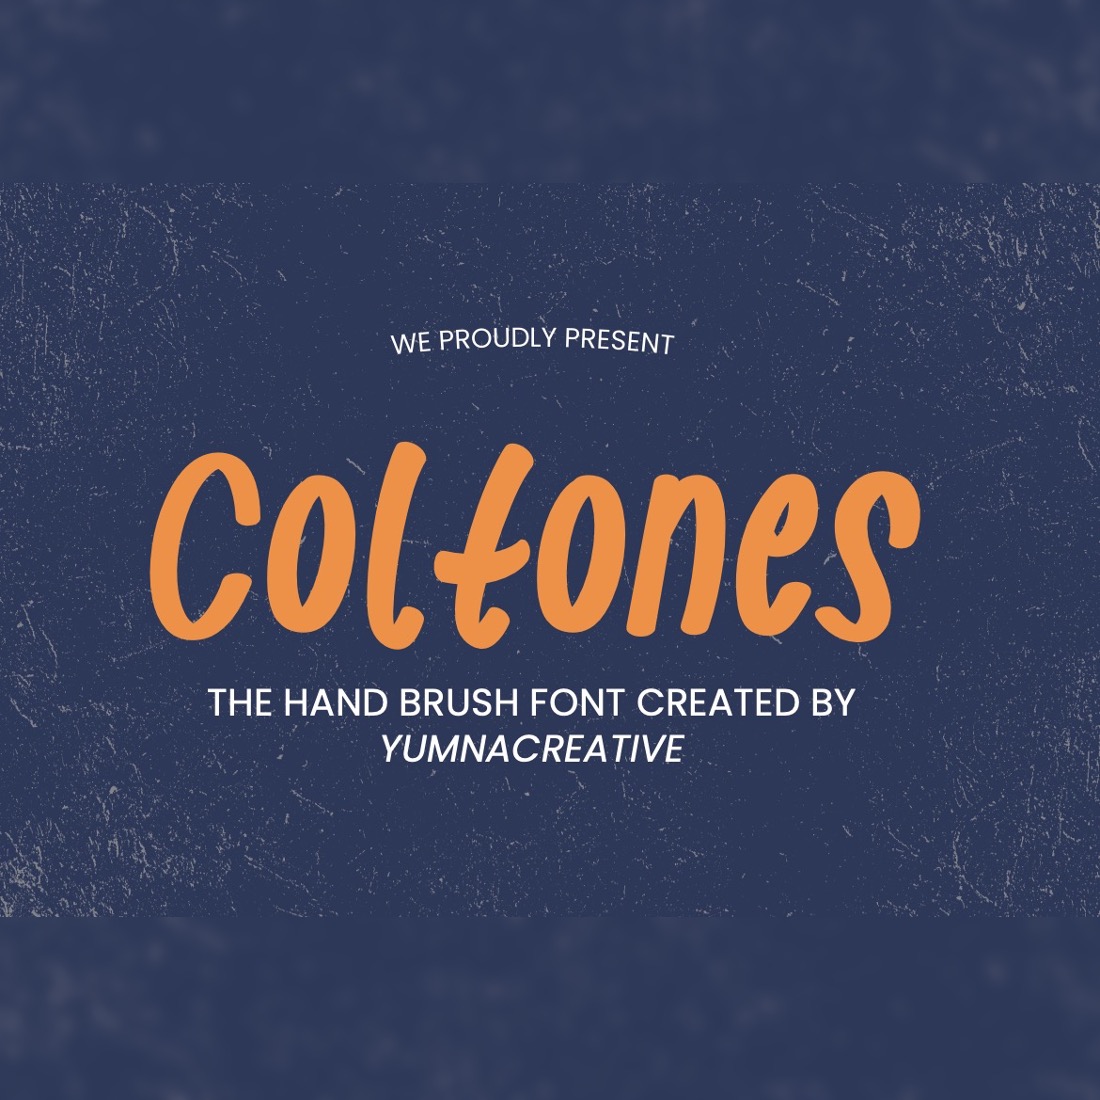 Coltones - Hand Brush Font cover image.